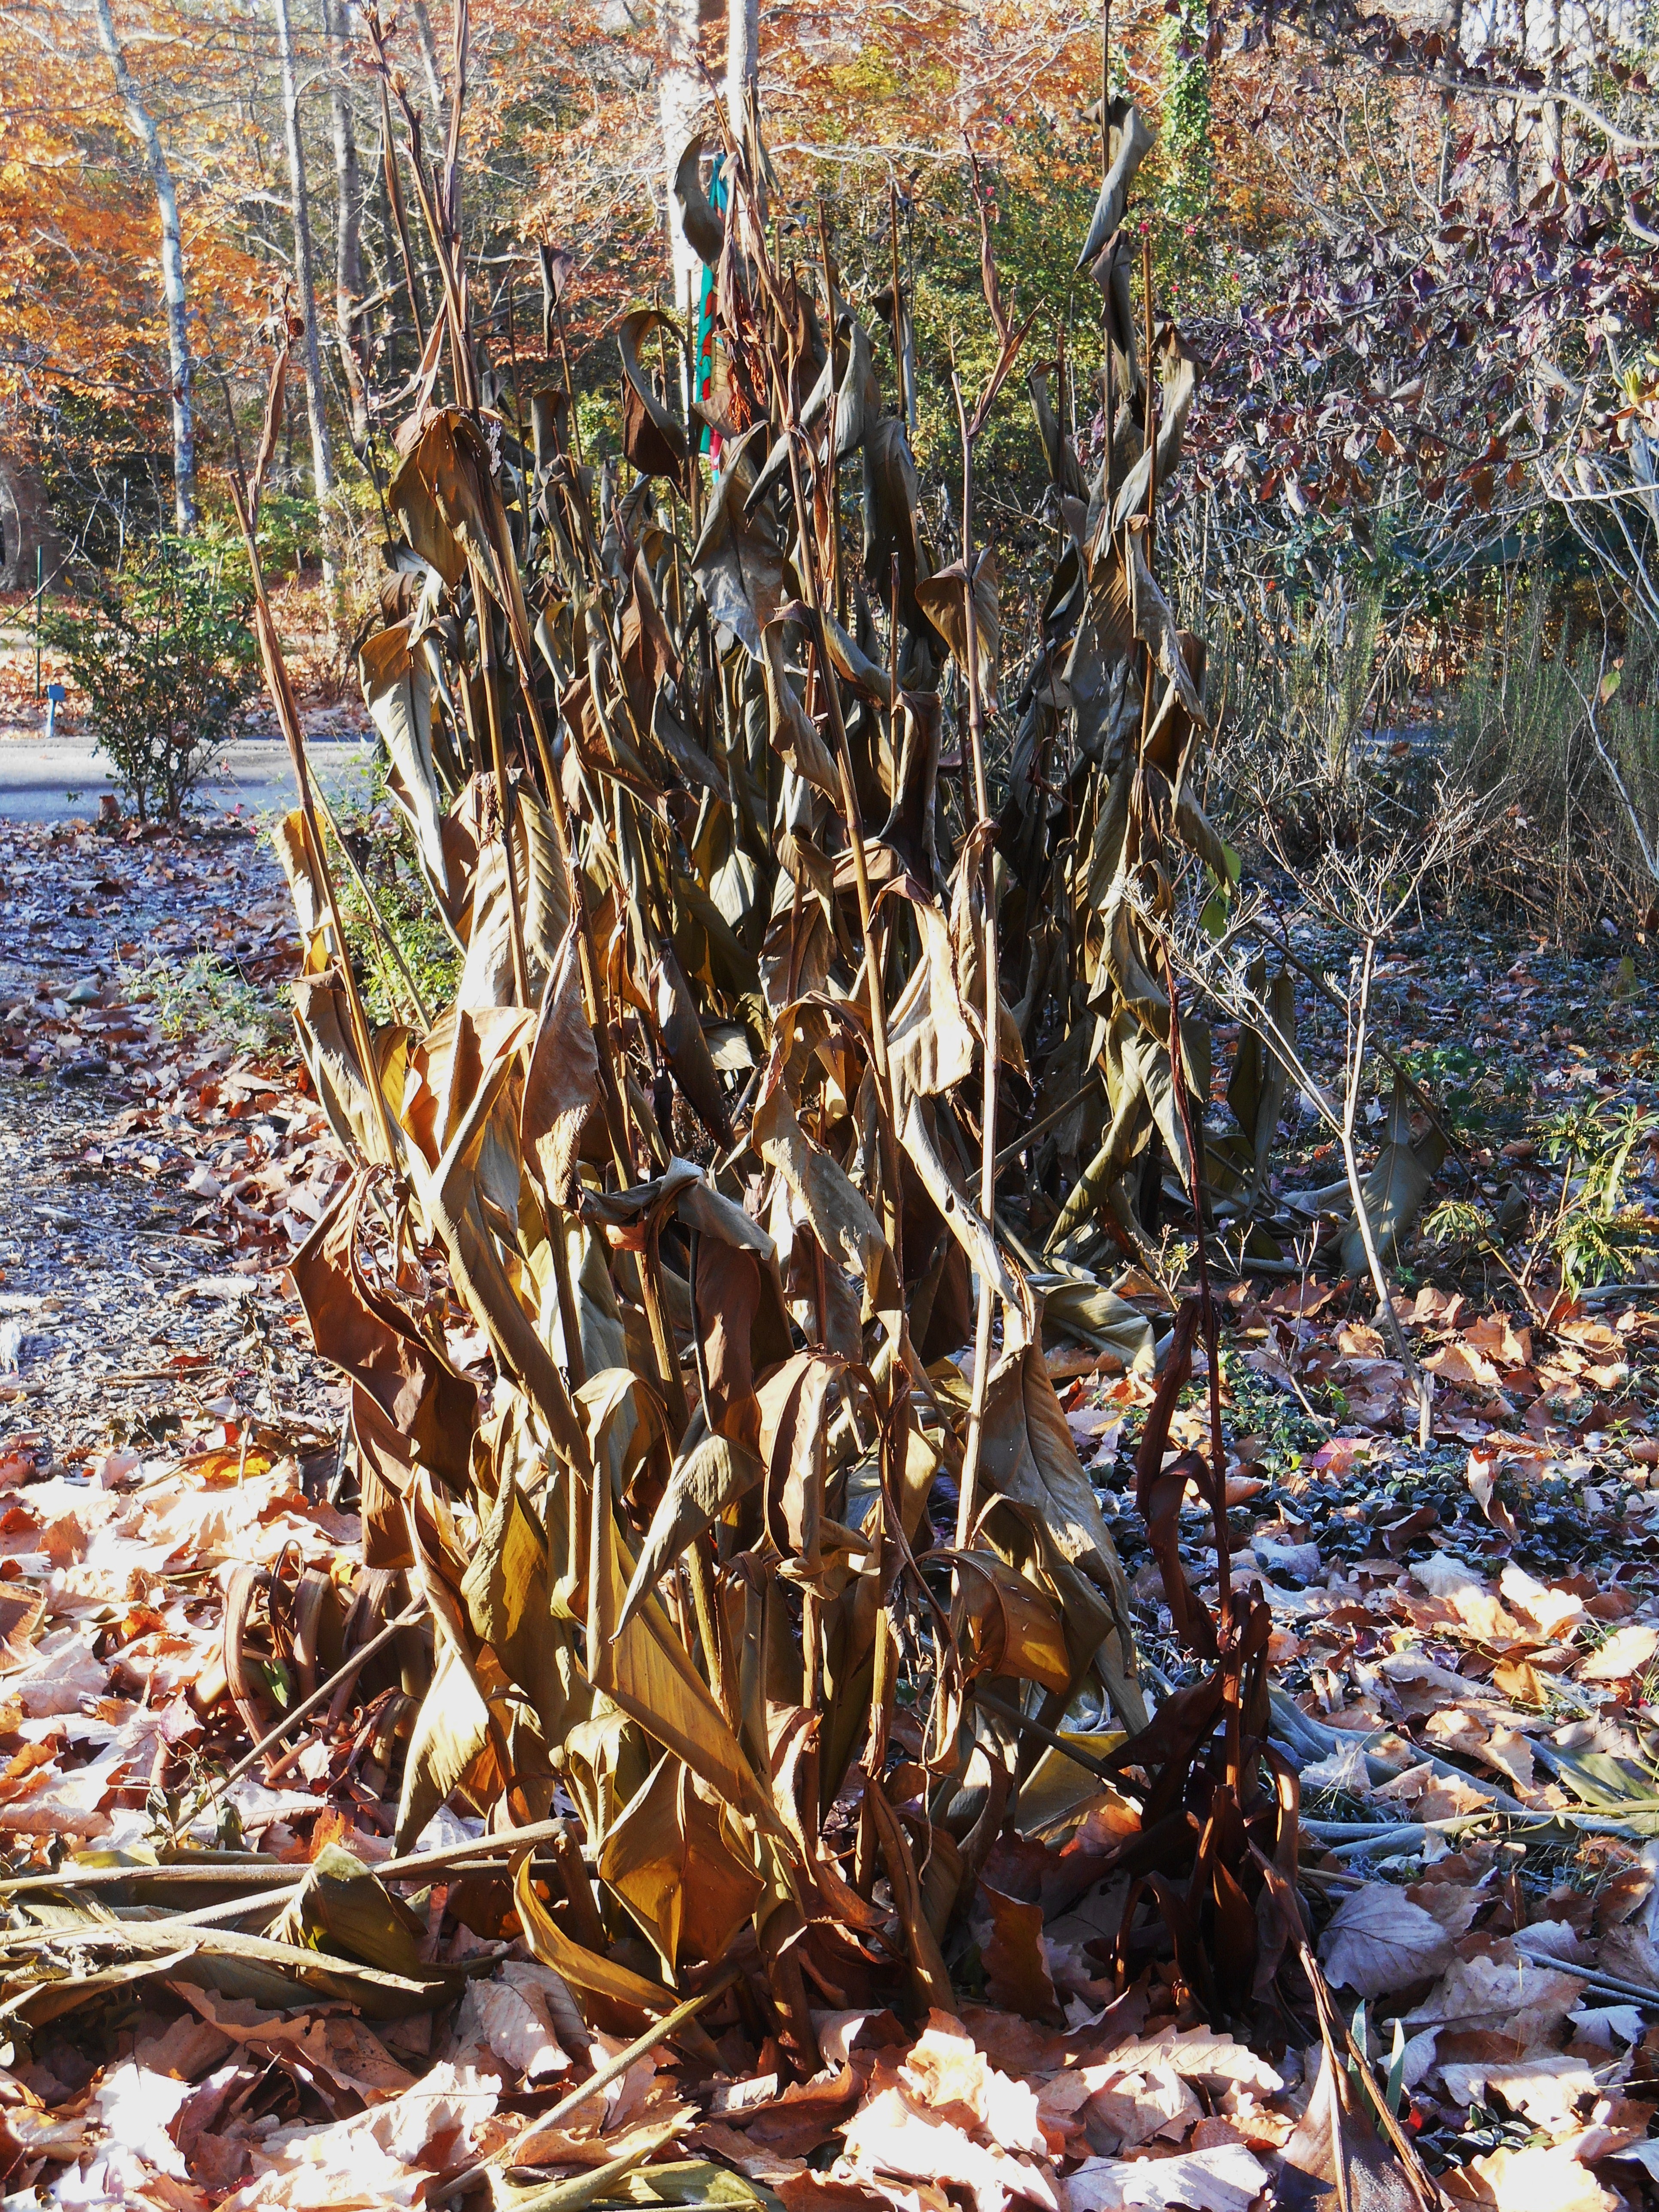 What remains of the Cannas